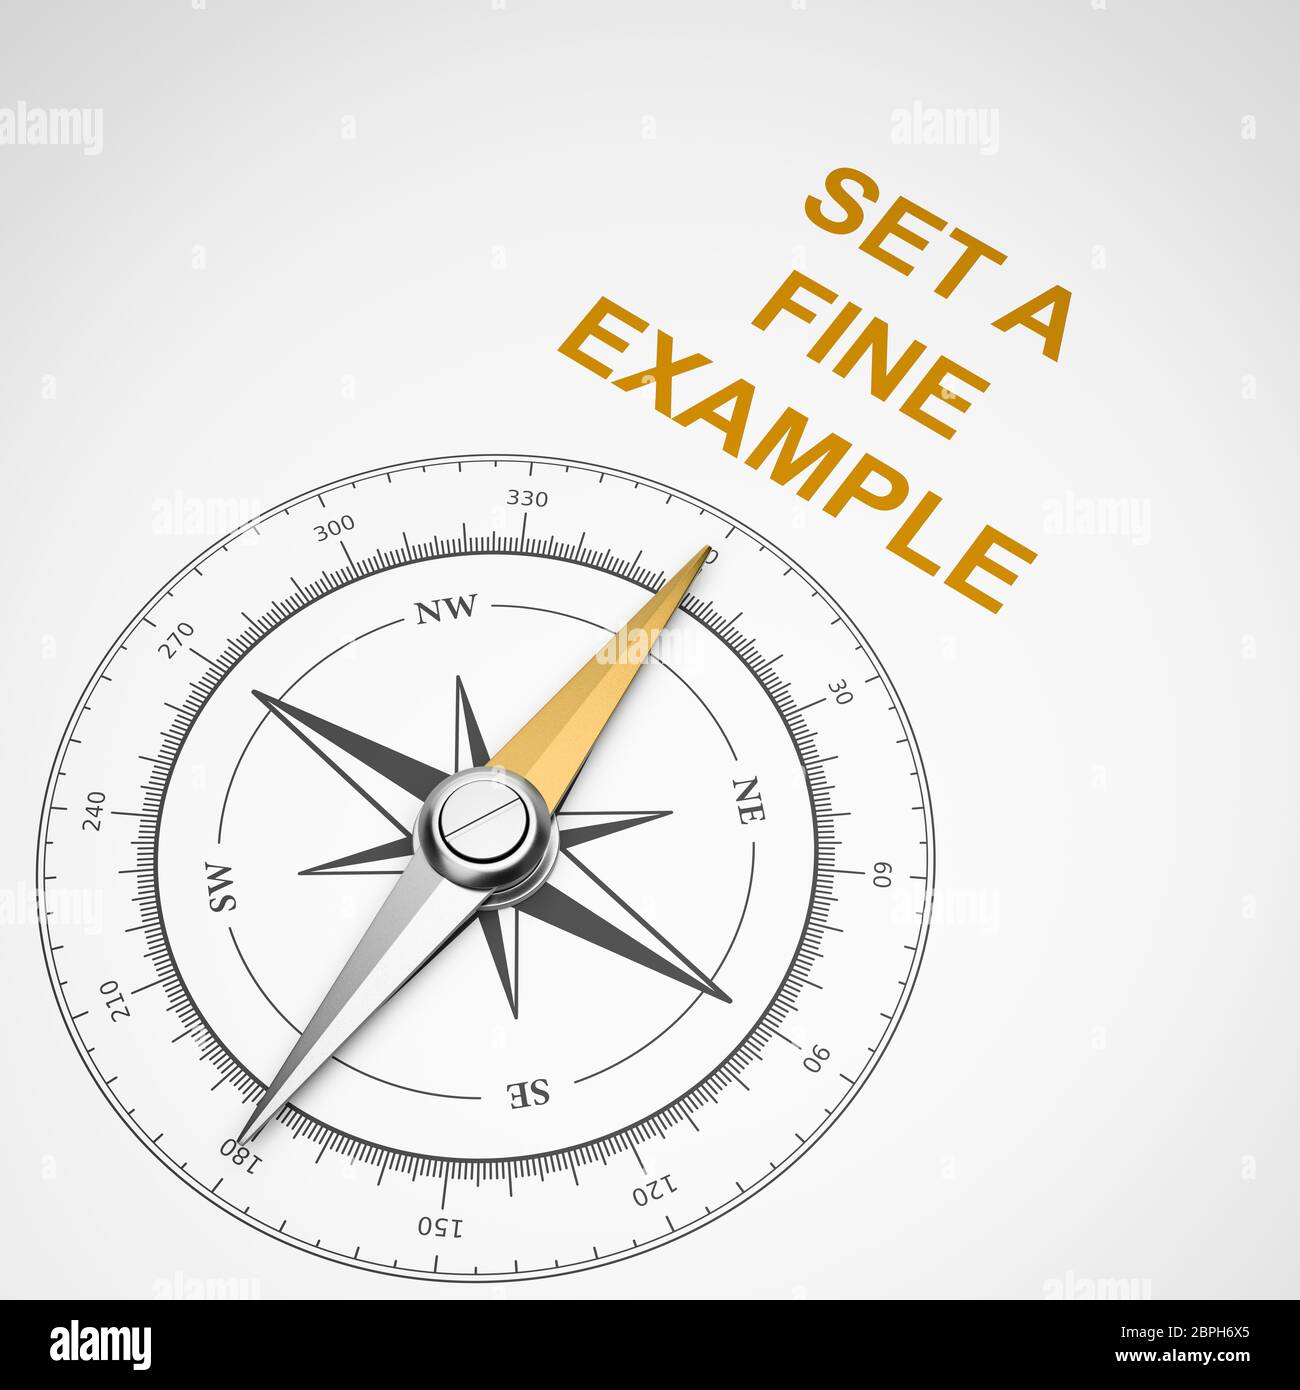 Magnetic Compass with Needle Pointing Orange Set a Fine Example Text on White Background 3D Illustration Stock Photo